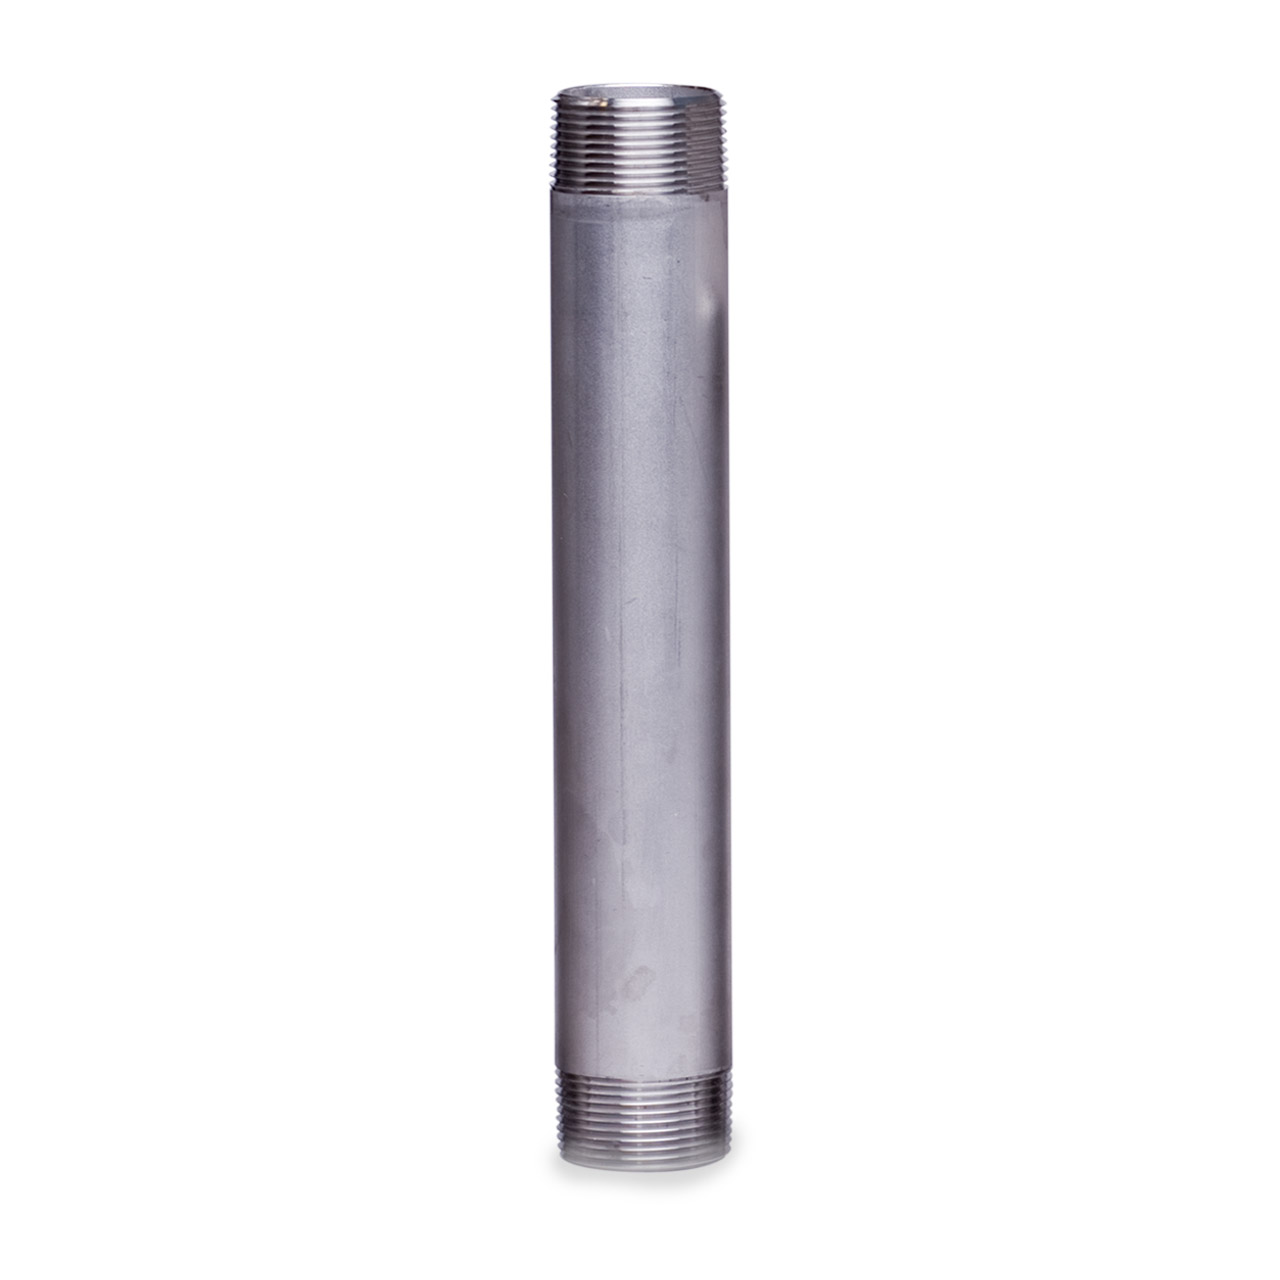 1XAY3 304 Stainless Steel Nipple Threaded on Both Ends Sch 40 3/4" MNPT x 12" 